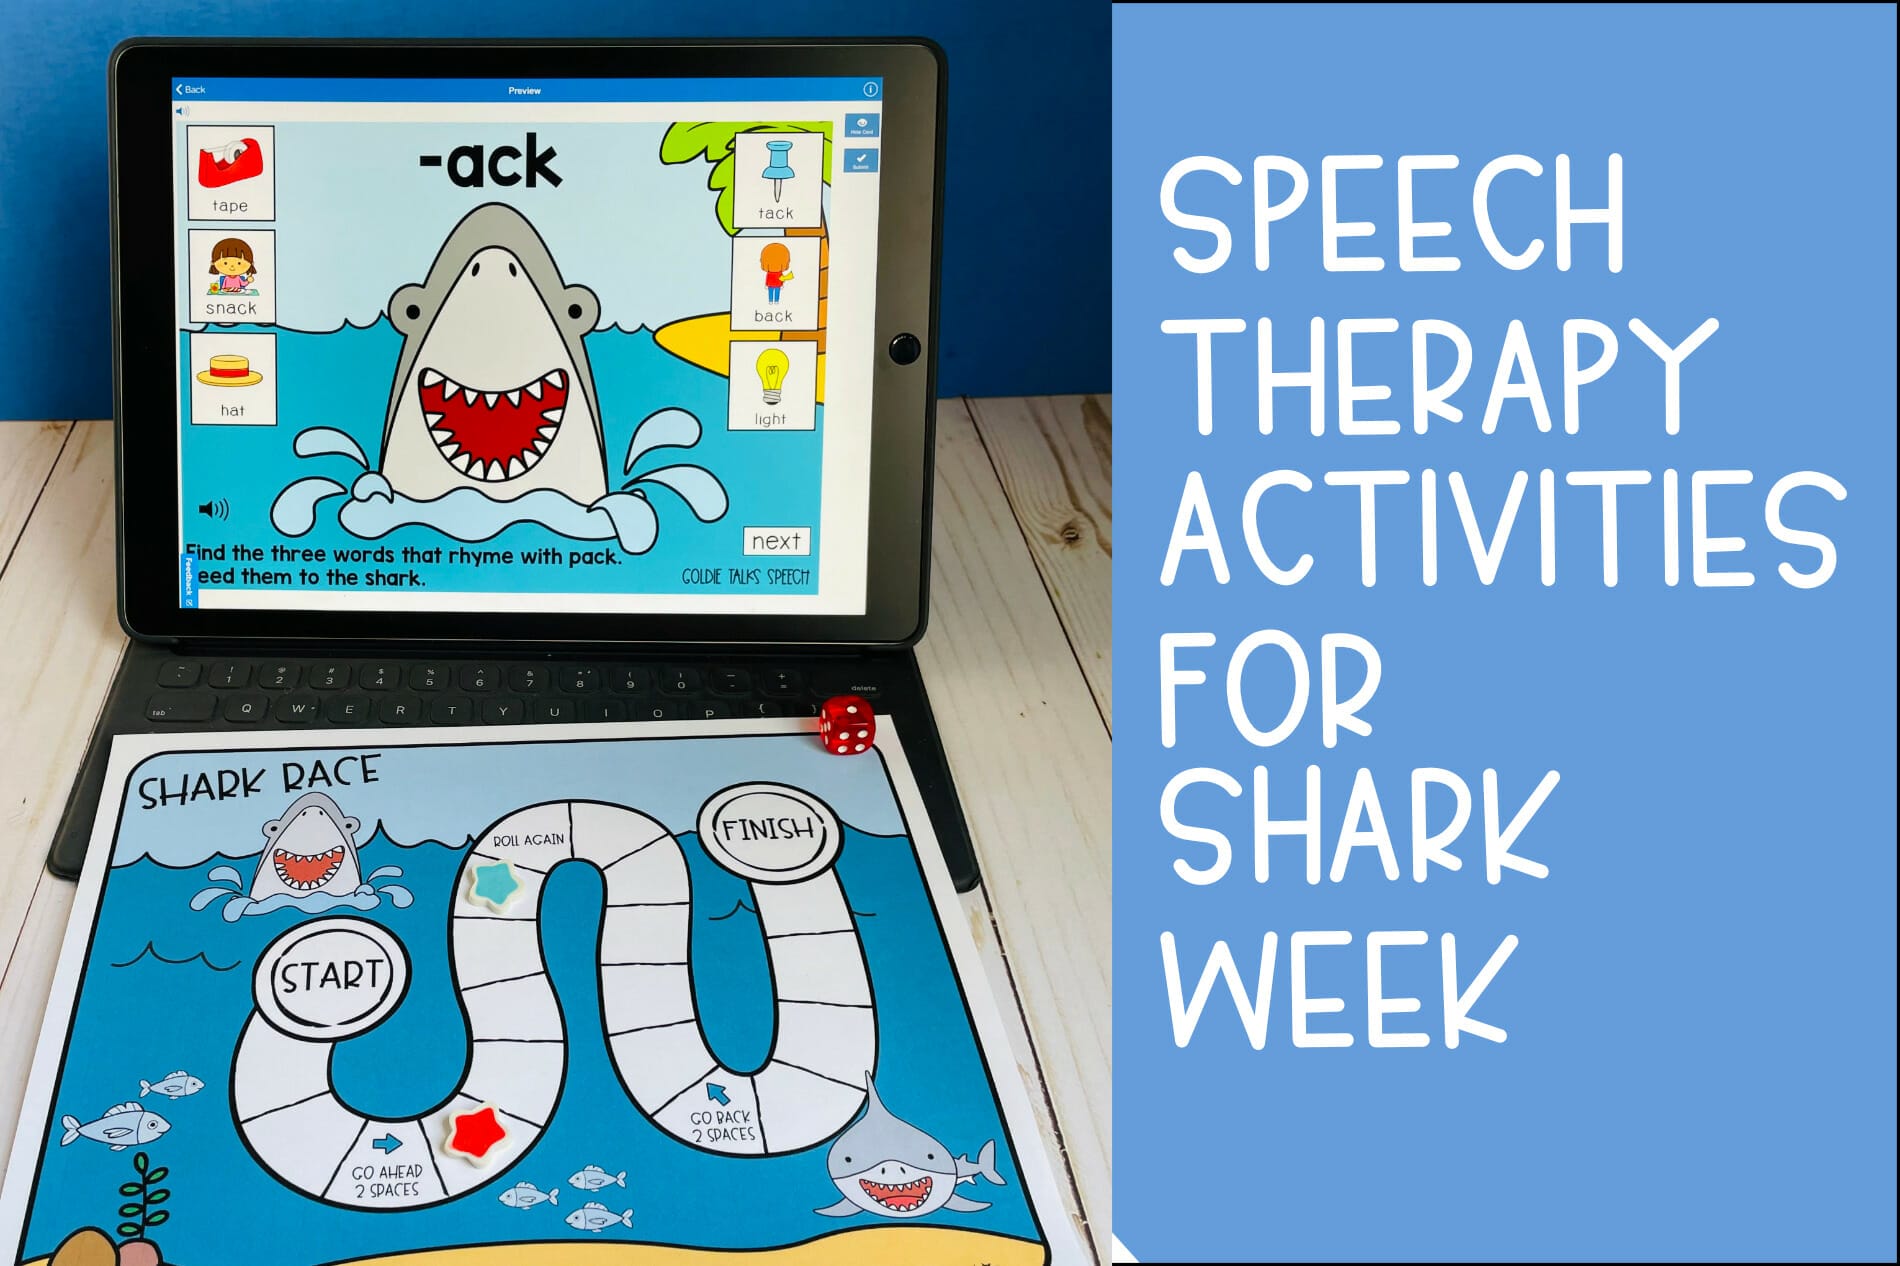 Play Word Shark Parts of Speech Free Language Arts Game for Kids